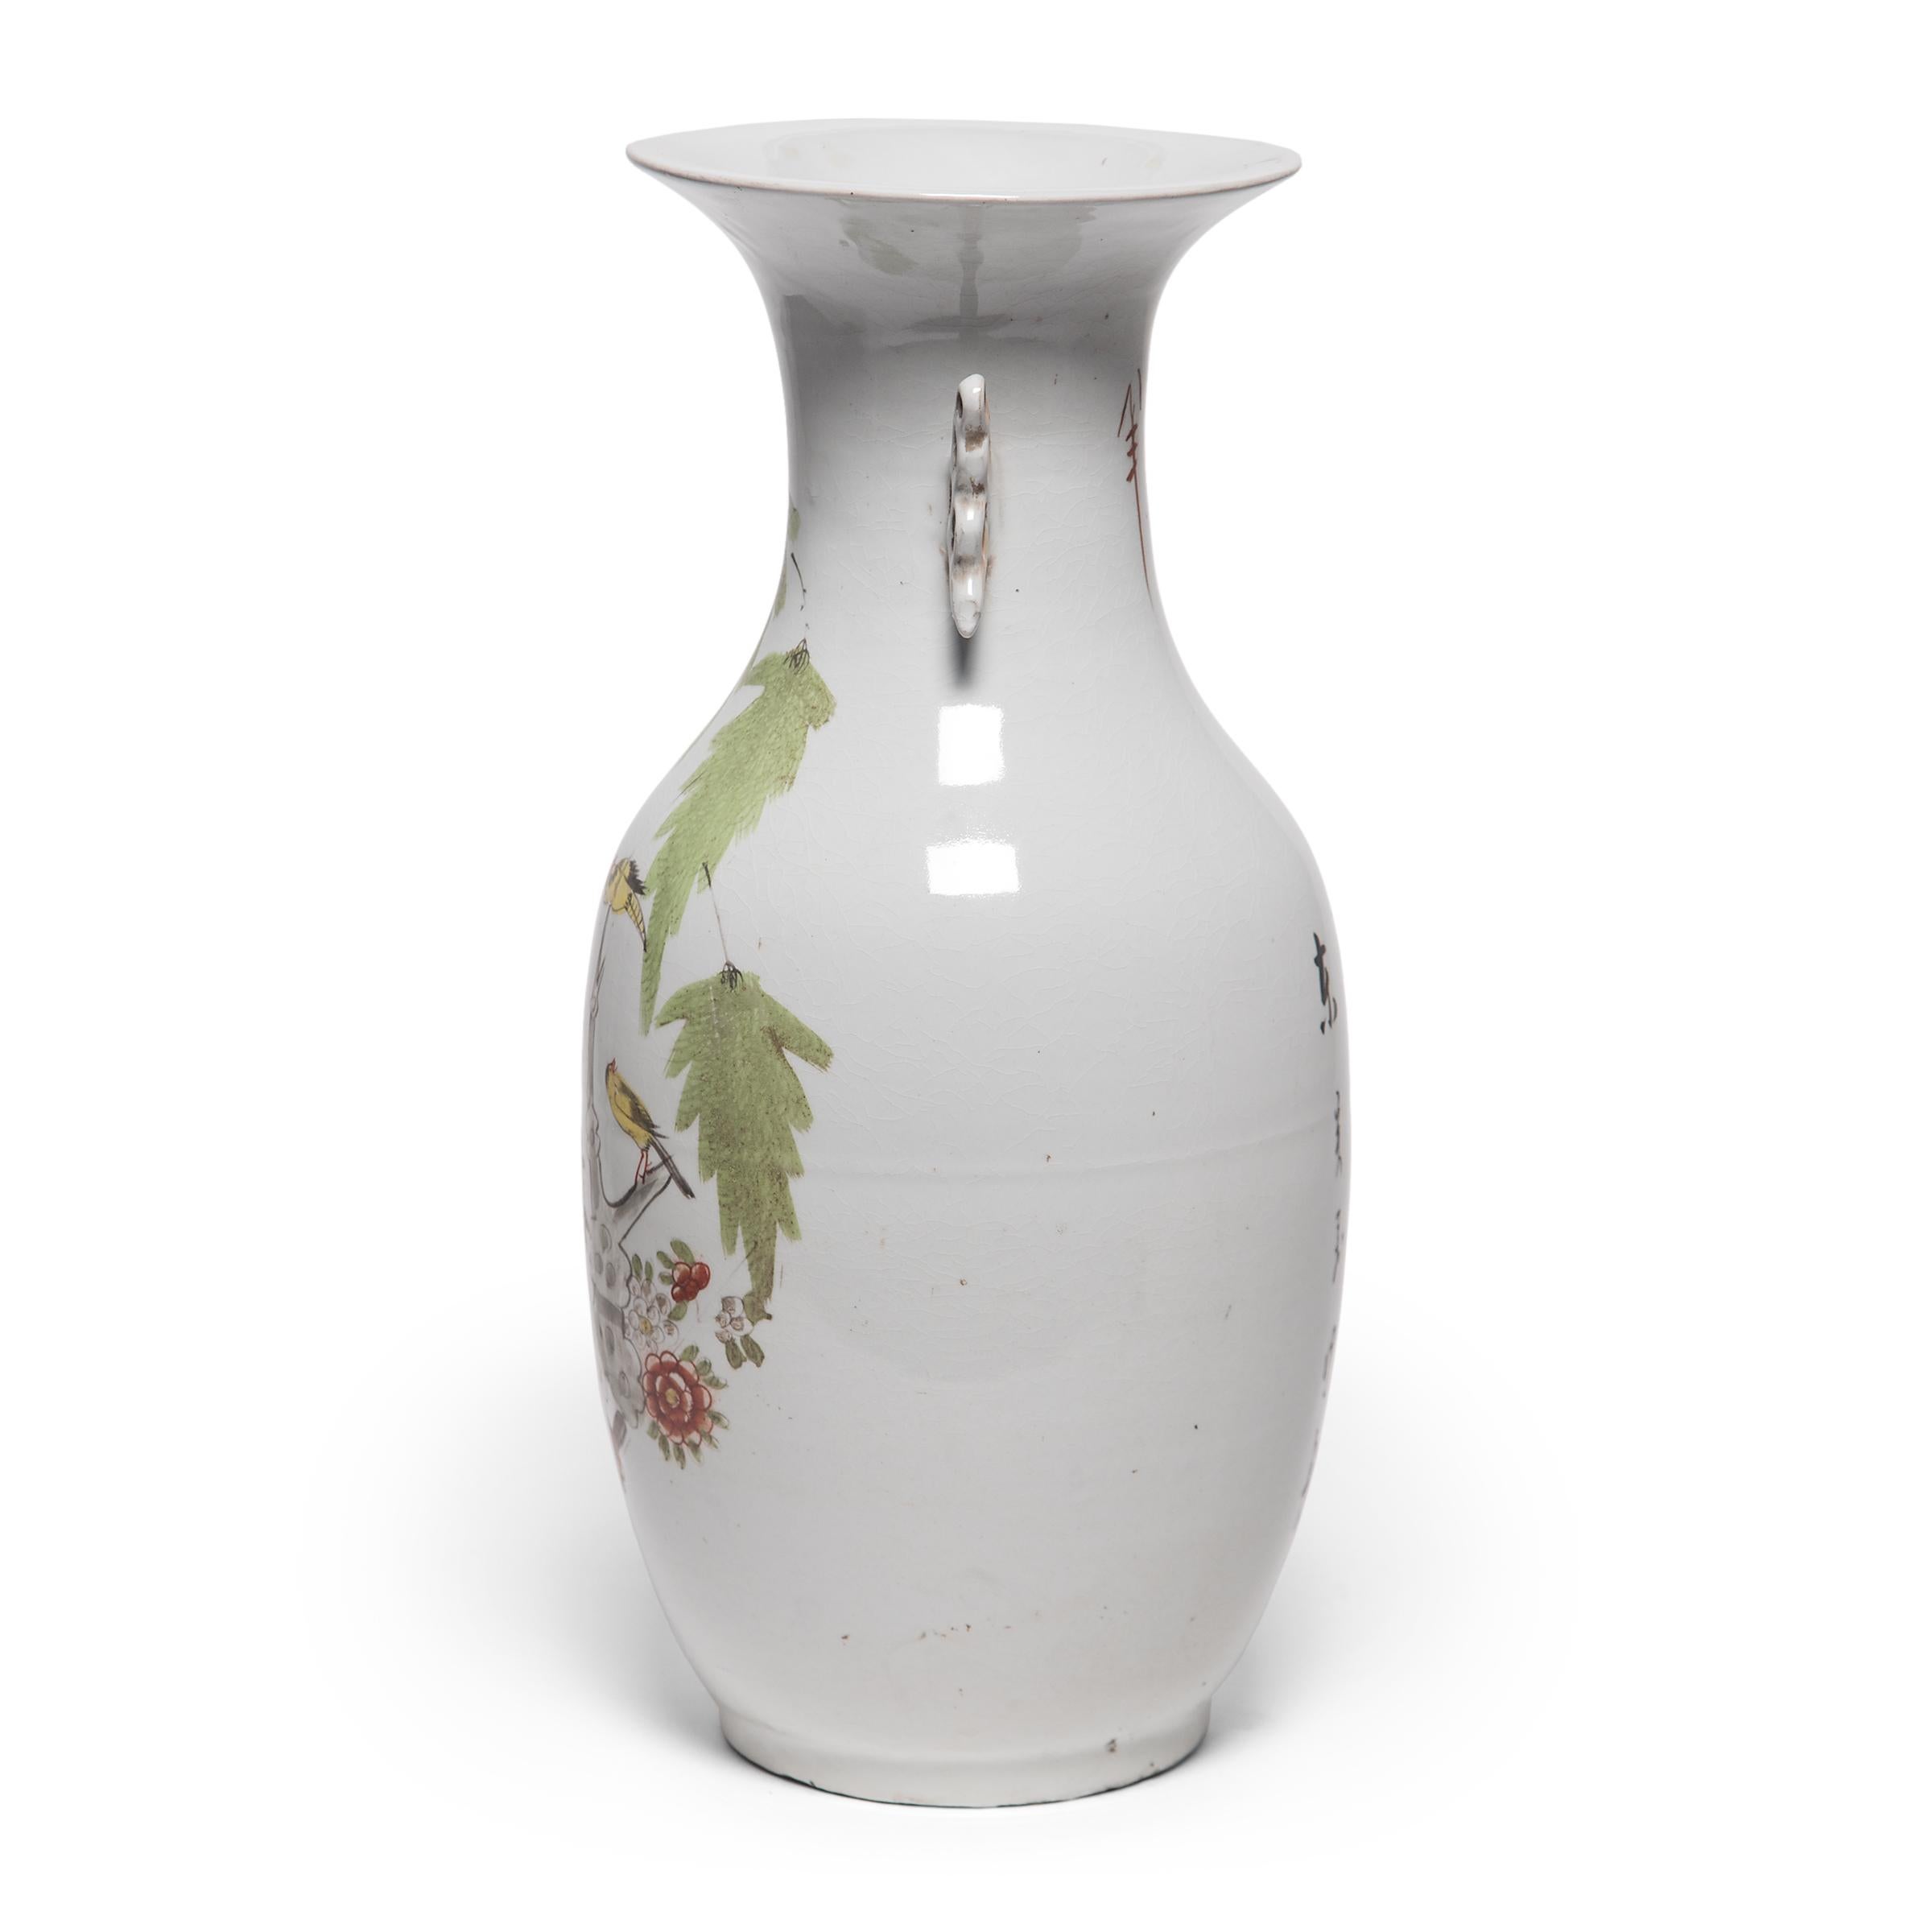 Sculpted in a traditional Chinese phoenix tail vase form, this elegant early 20th century vase is adorned with a scene of magpies flitting between branches covered in cherry blossoms. Regarded as a bird of good omen, magpies bring joy and good